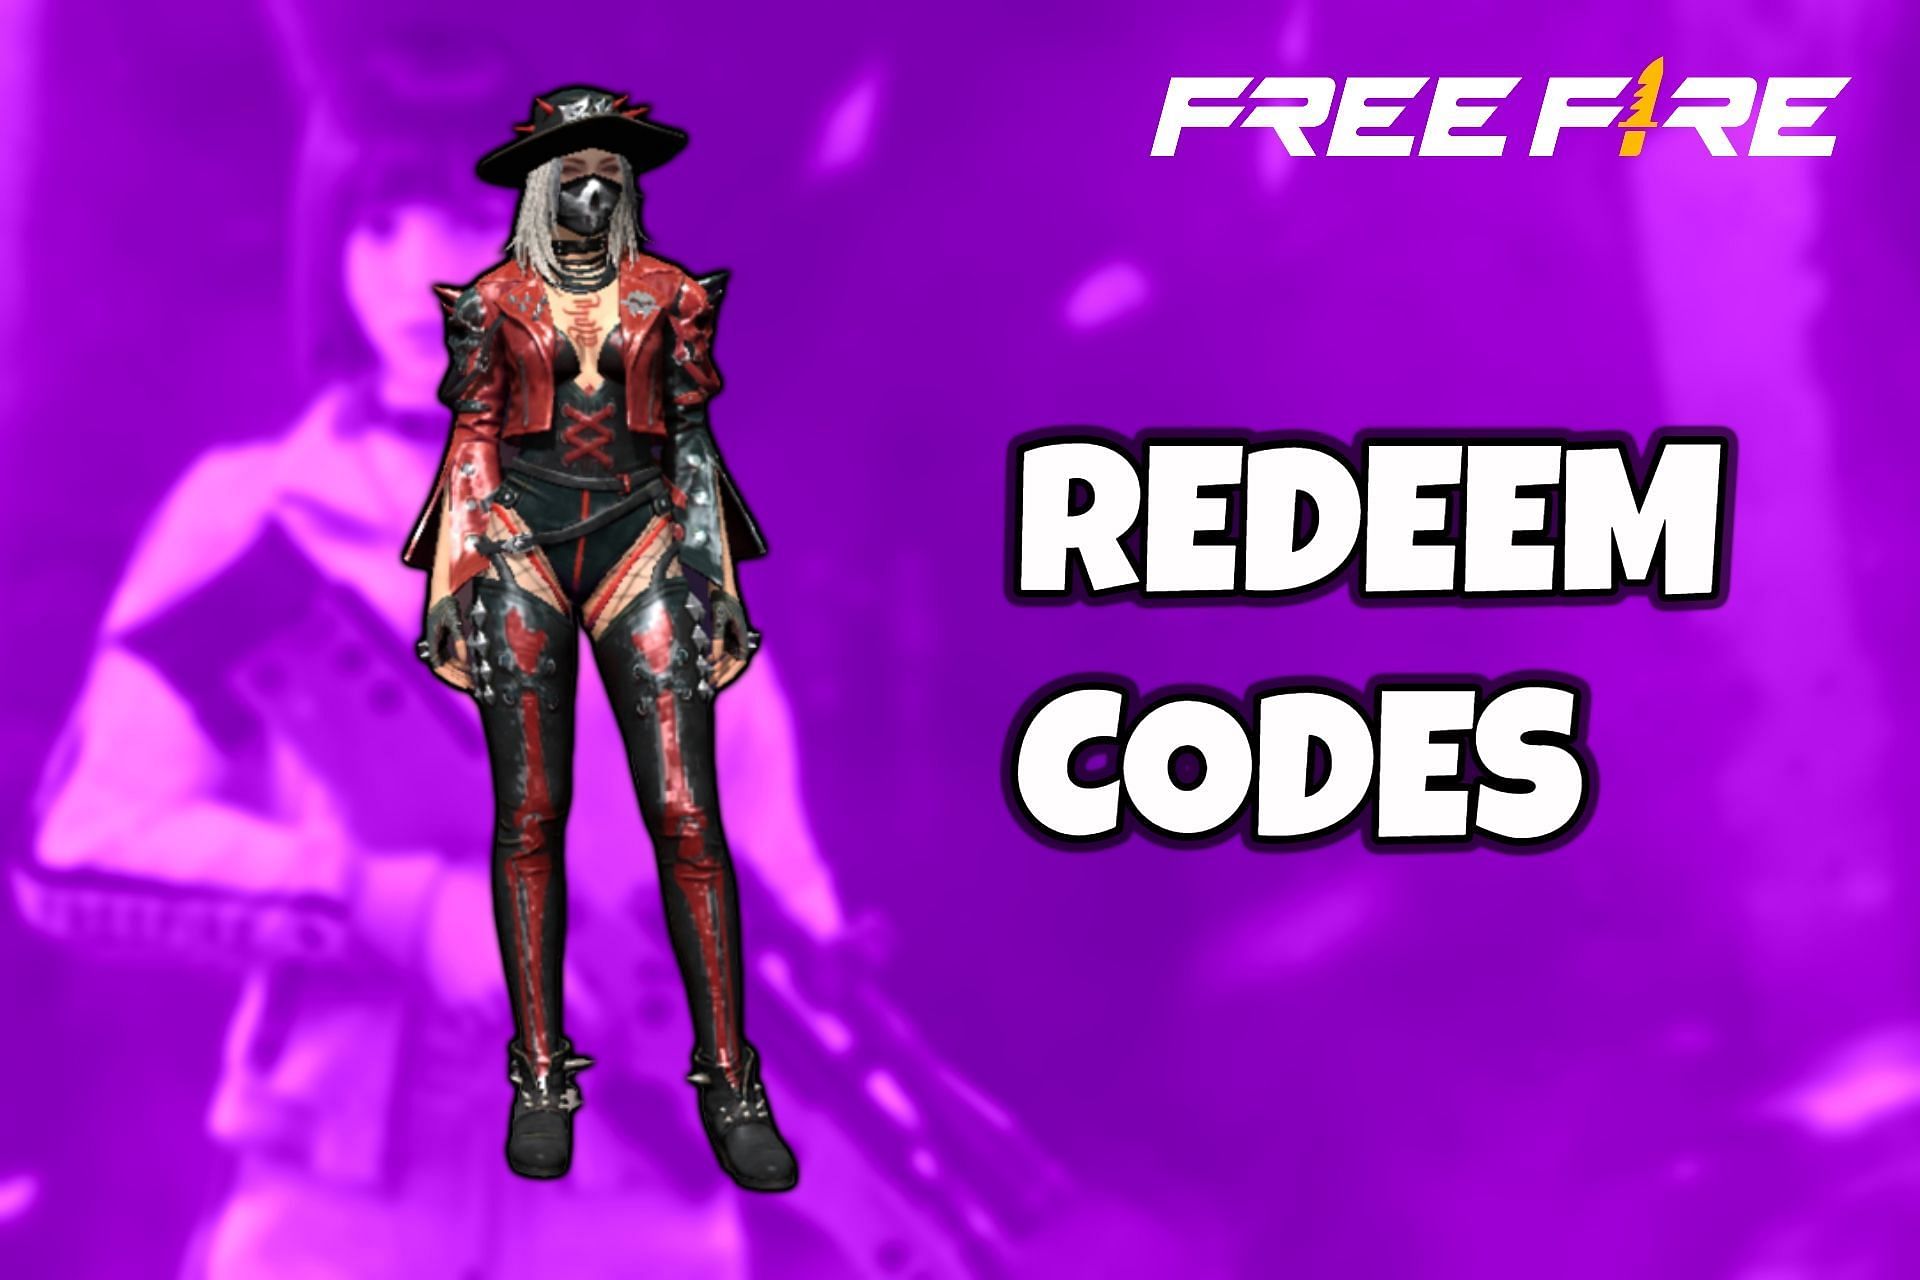 NEW REDEEM CODE FOR PATCH 4.1 TWITTER EVENT